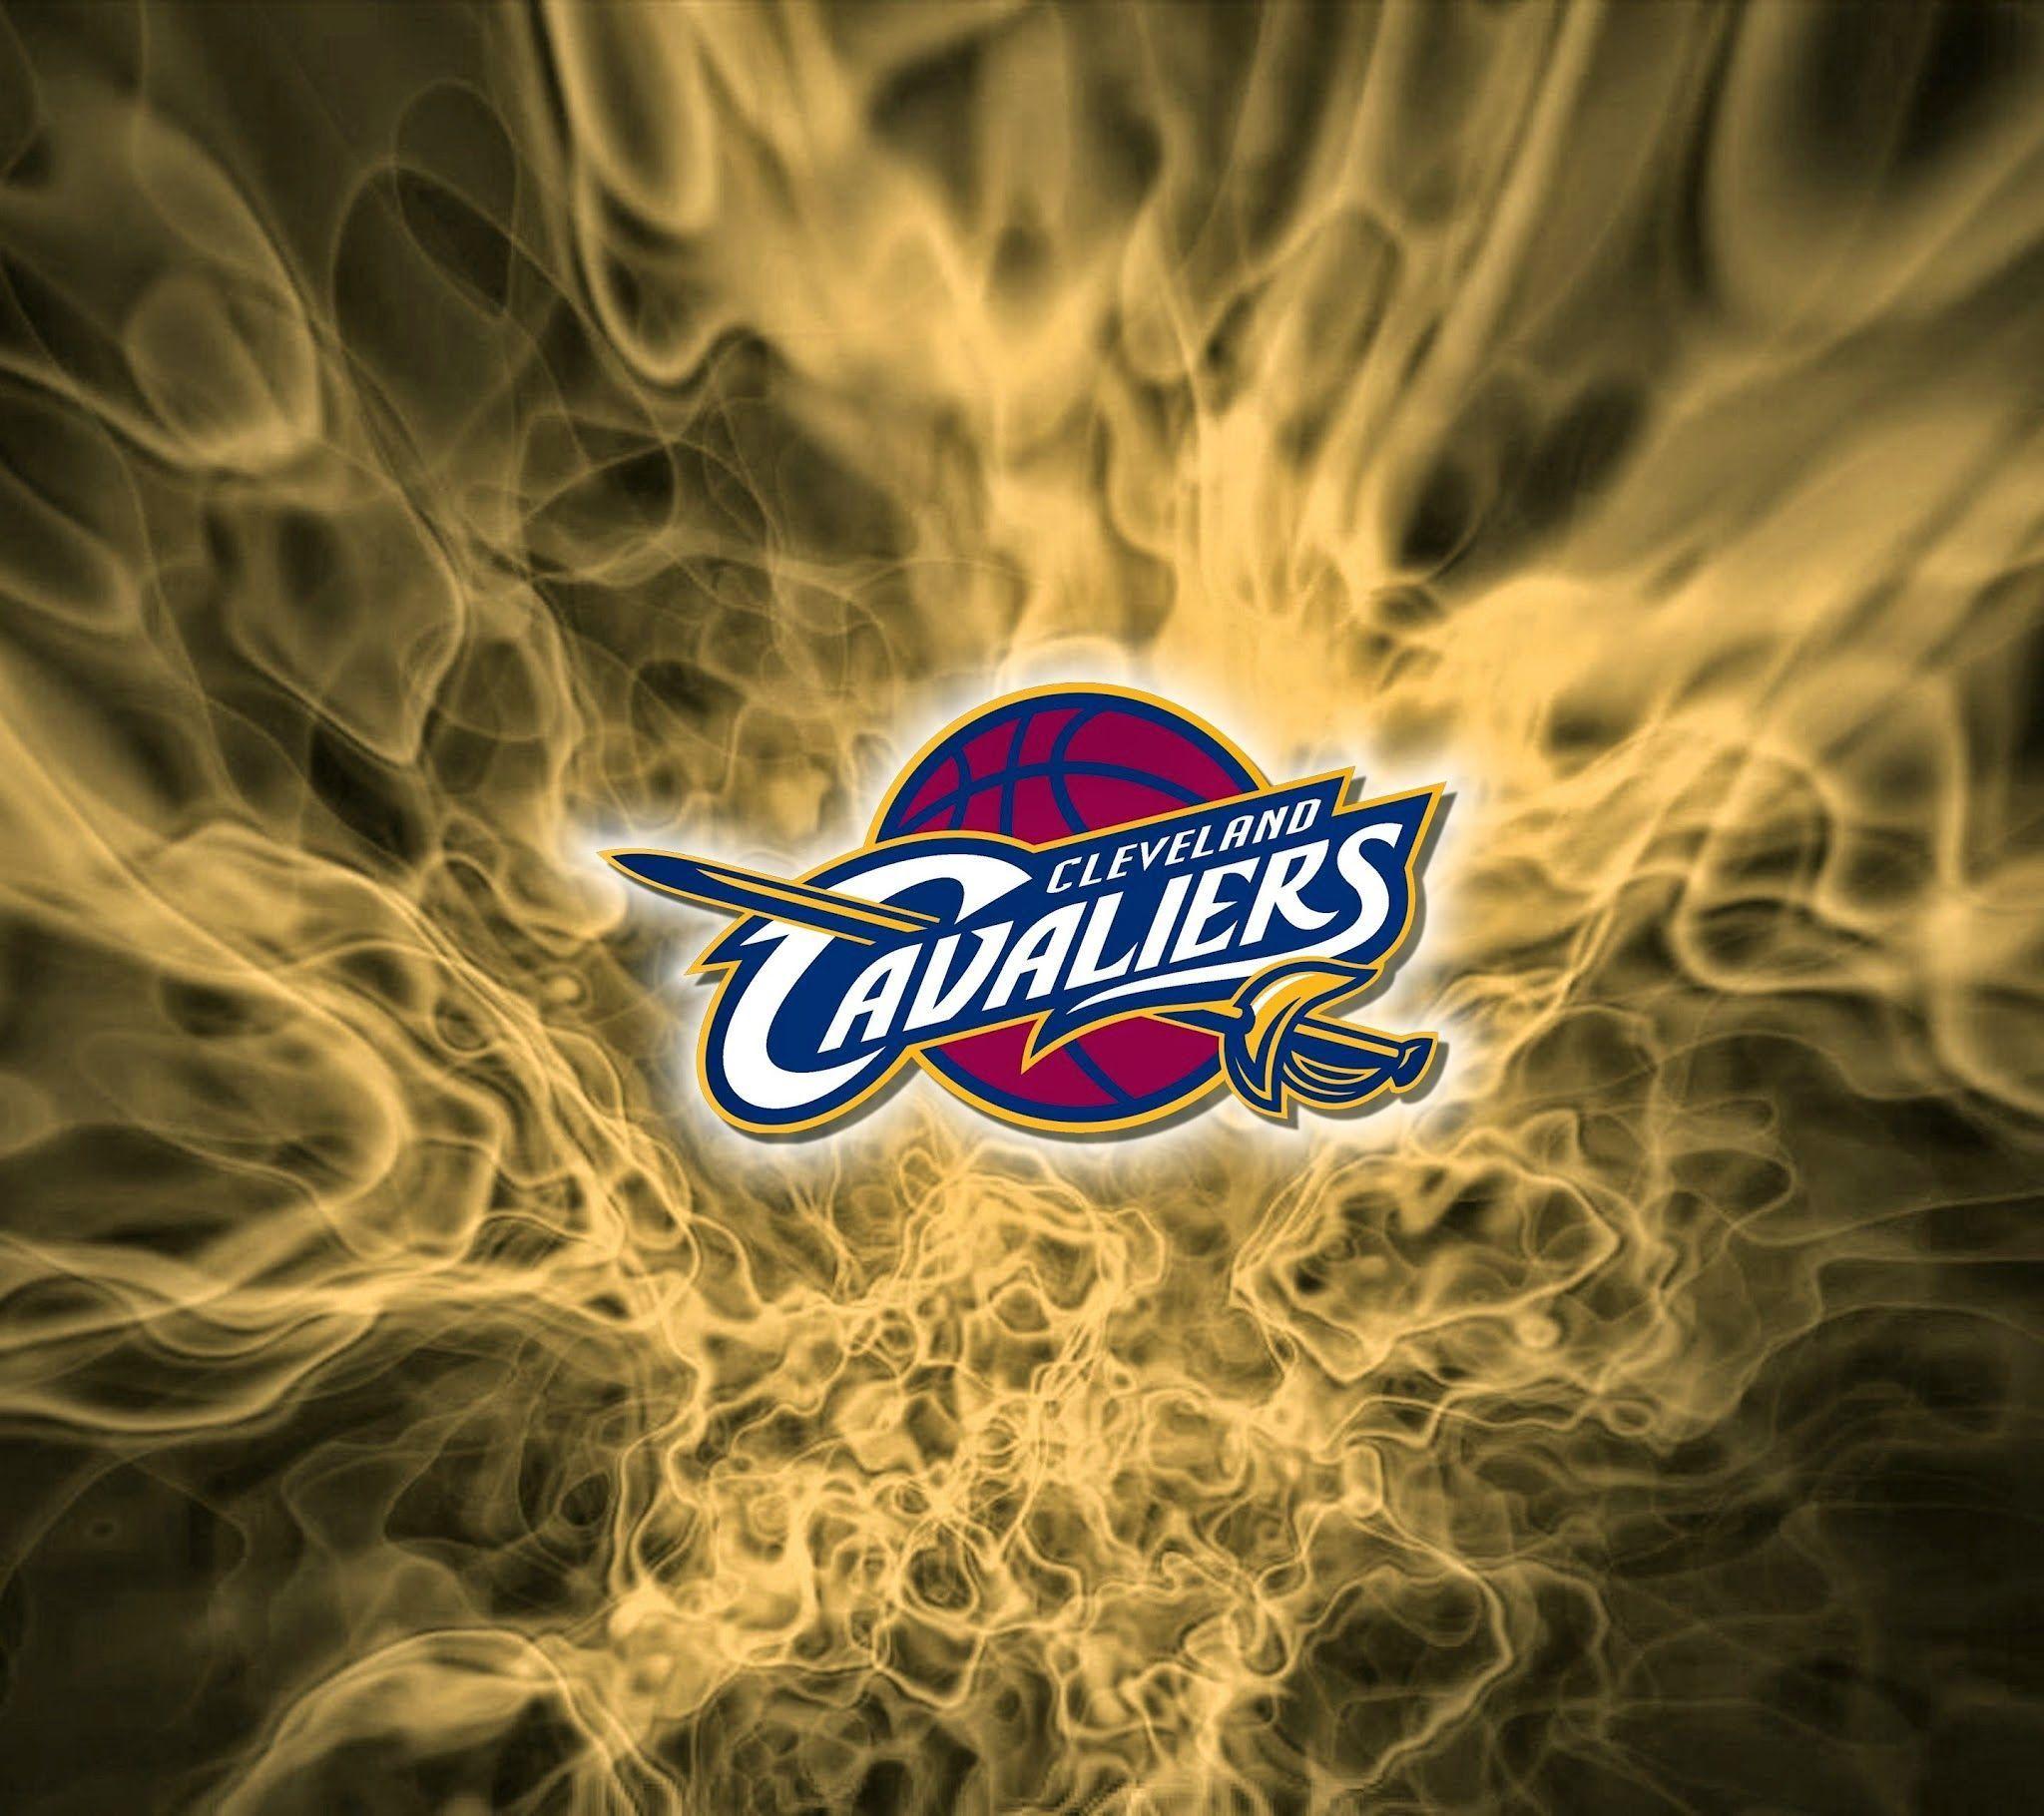 Cleveland Cavaliers Logo Mobile Wallpaper, Cleveland Cavaliers